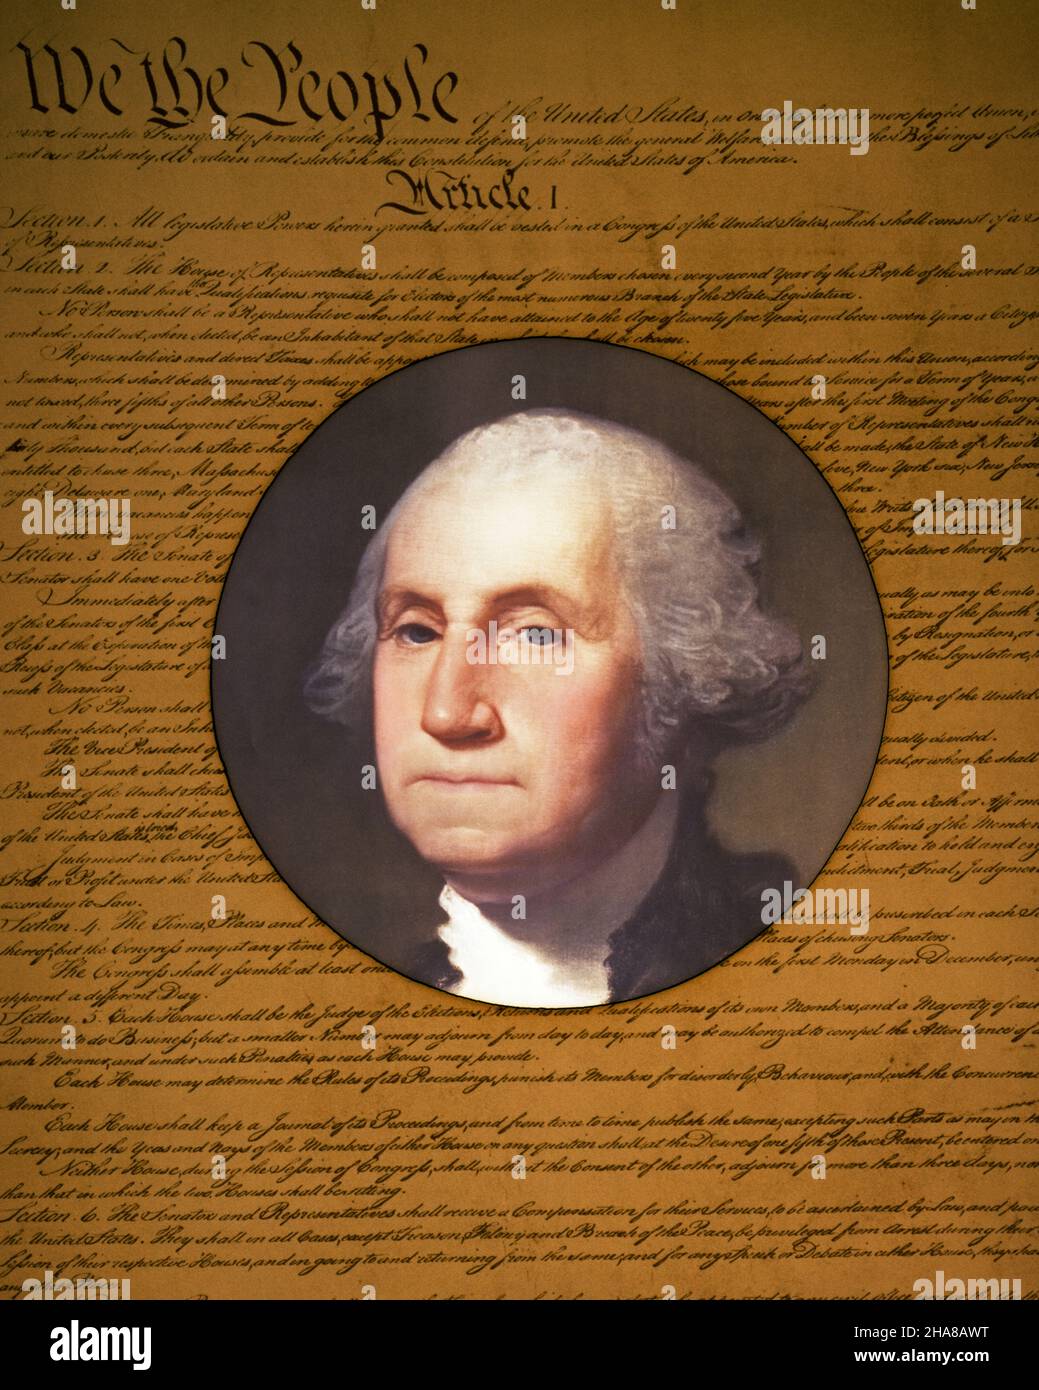 1790s VIGNETTE OF GEORGE WASHINGTON FIRST PRESIDENT ON TOP OF DOCUMENT THE UNITED STATES CONSTITUTION WE THE PEOPLE - kh8660 HAR001 HARS POLITICS CONCEPT CONCEPTUAL REVOLUTIONARY WAR GEORGE WASHINGTON SYMBOLIC CONCEPTS STATESMAN 1790s CAUCASIAN ETHNICITY FOUNDING FATHER HAR001 OLD FASHIONED REPRESENTATION VIGNETTE VIRGINIAN Stock Photo